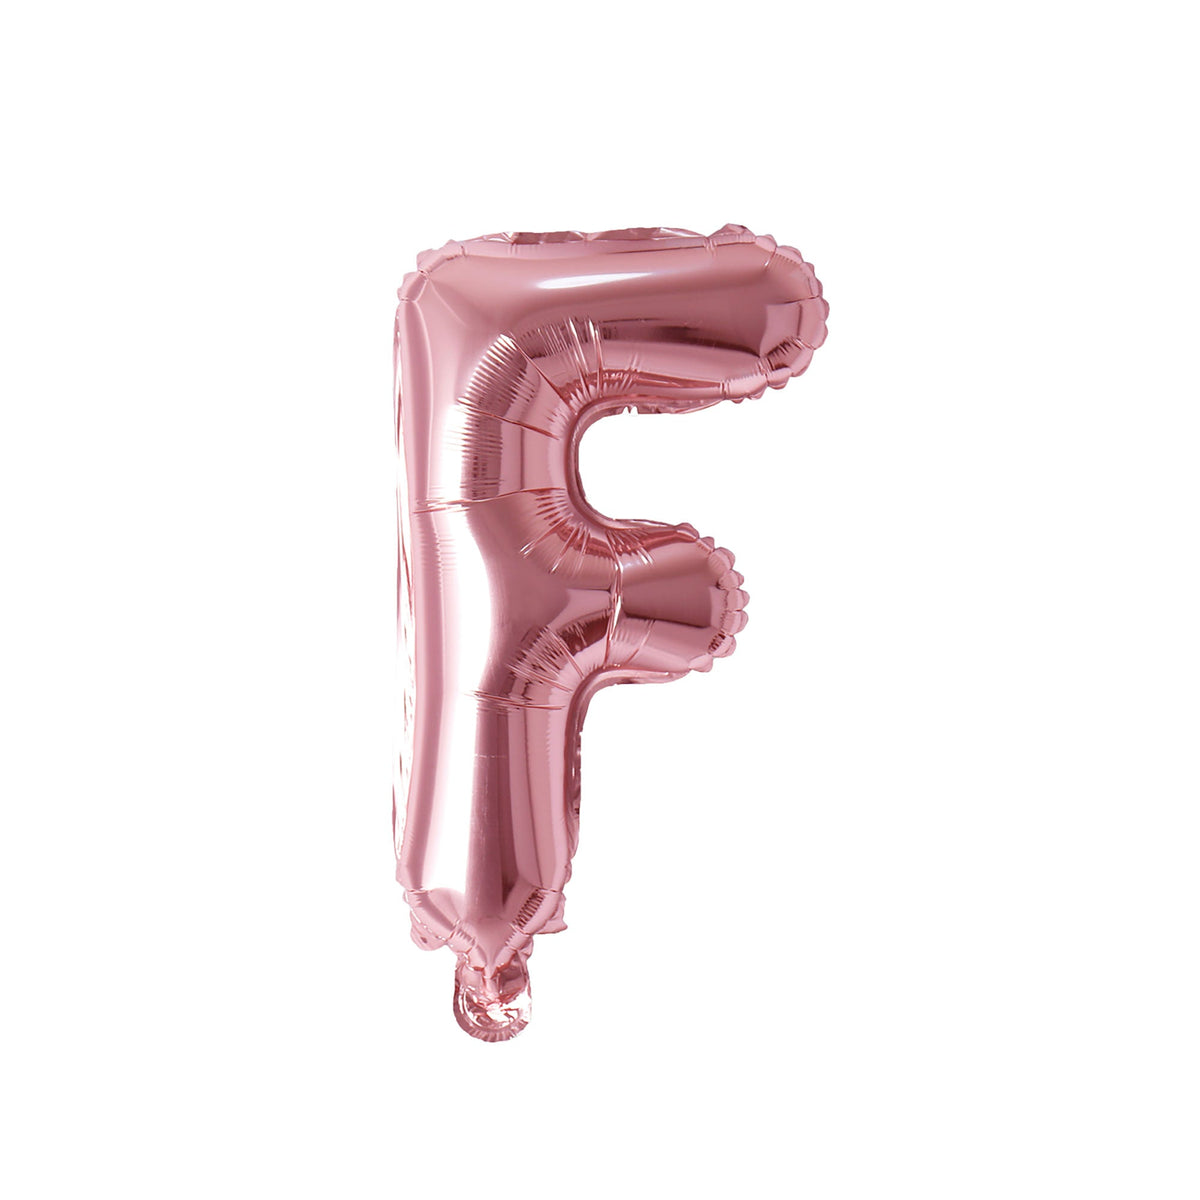 PARTY EXPERT Balloons Rose Gold Letter F Foil Balloon, 16 Inches, 1 Count 810064194245